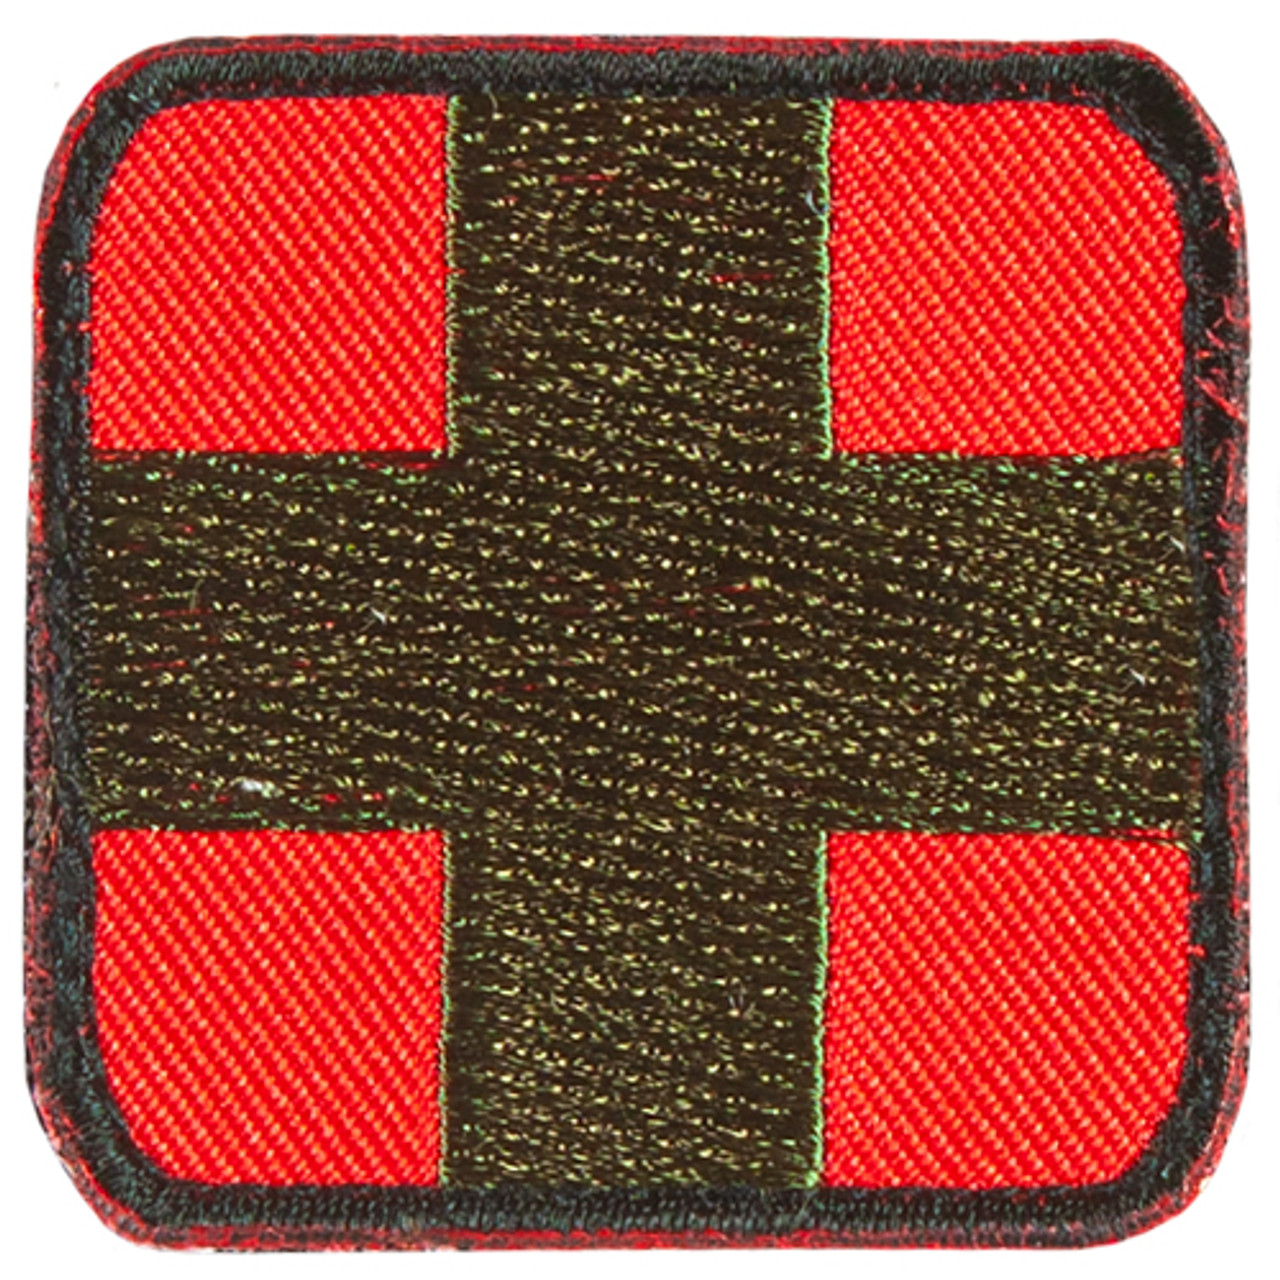 Medic Patch - Thunderhead Outfitters